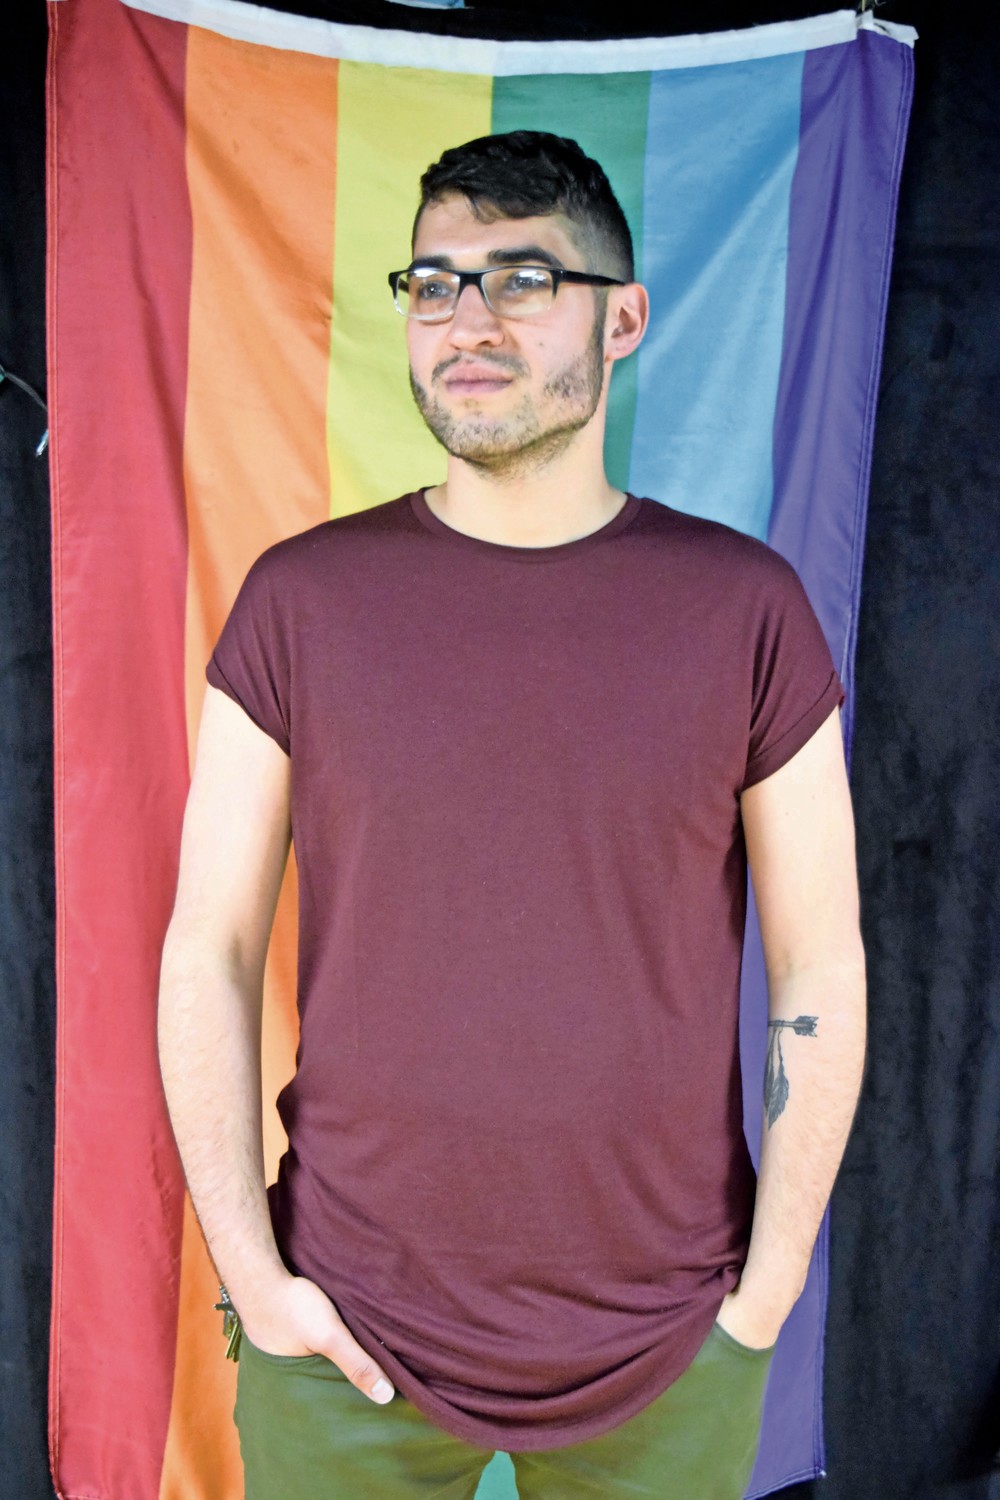 Nick Dantuono, 22, of Seaford, is an outreach specialist at Pride For Youth, a community group for LGBT individuals. He came out as gay four years ago.